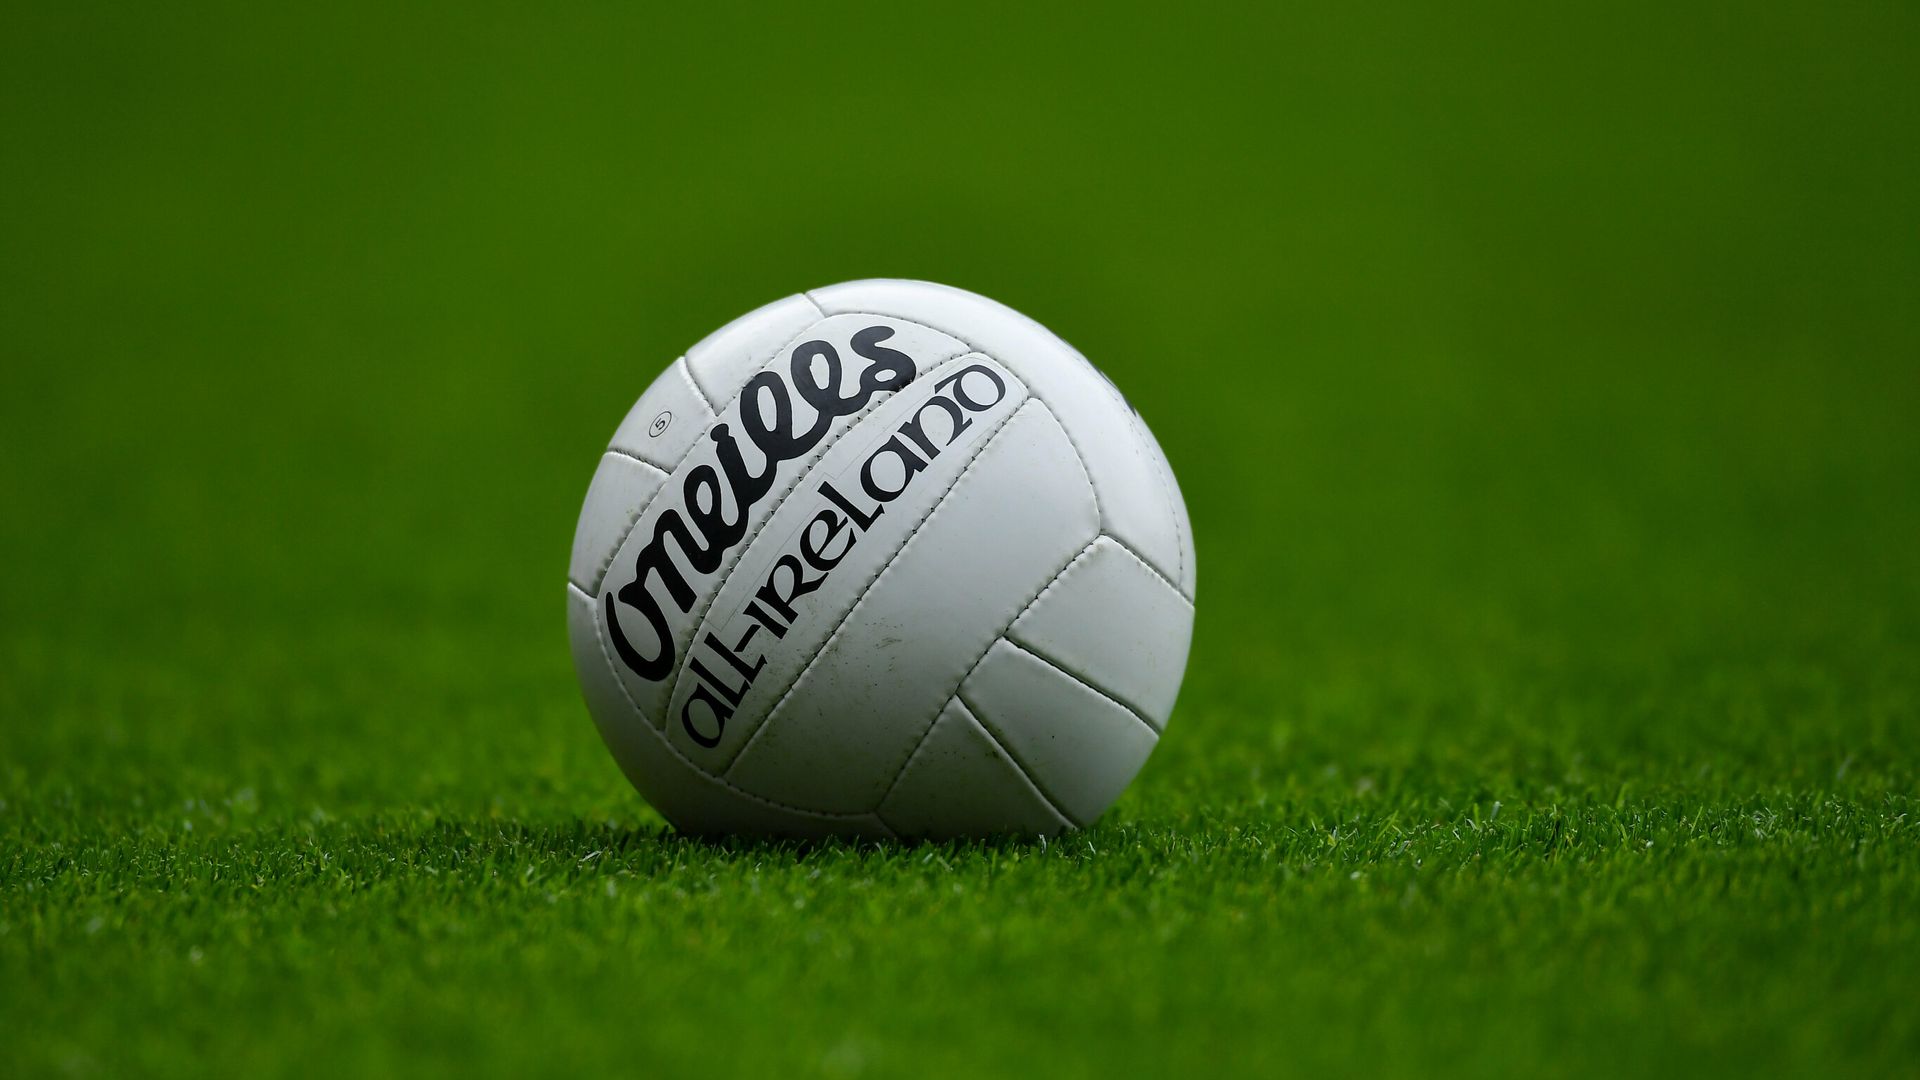 Kerry-Tyrone and All-Ireland final postponed once more